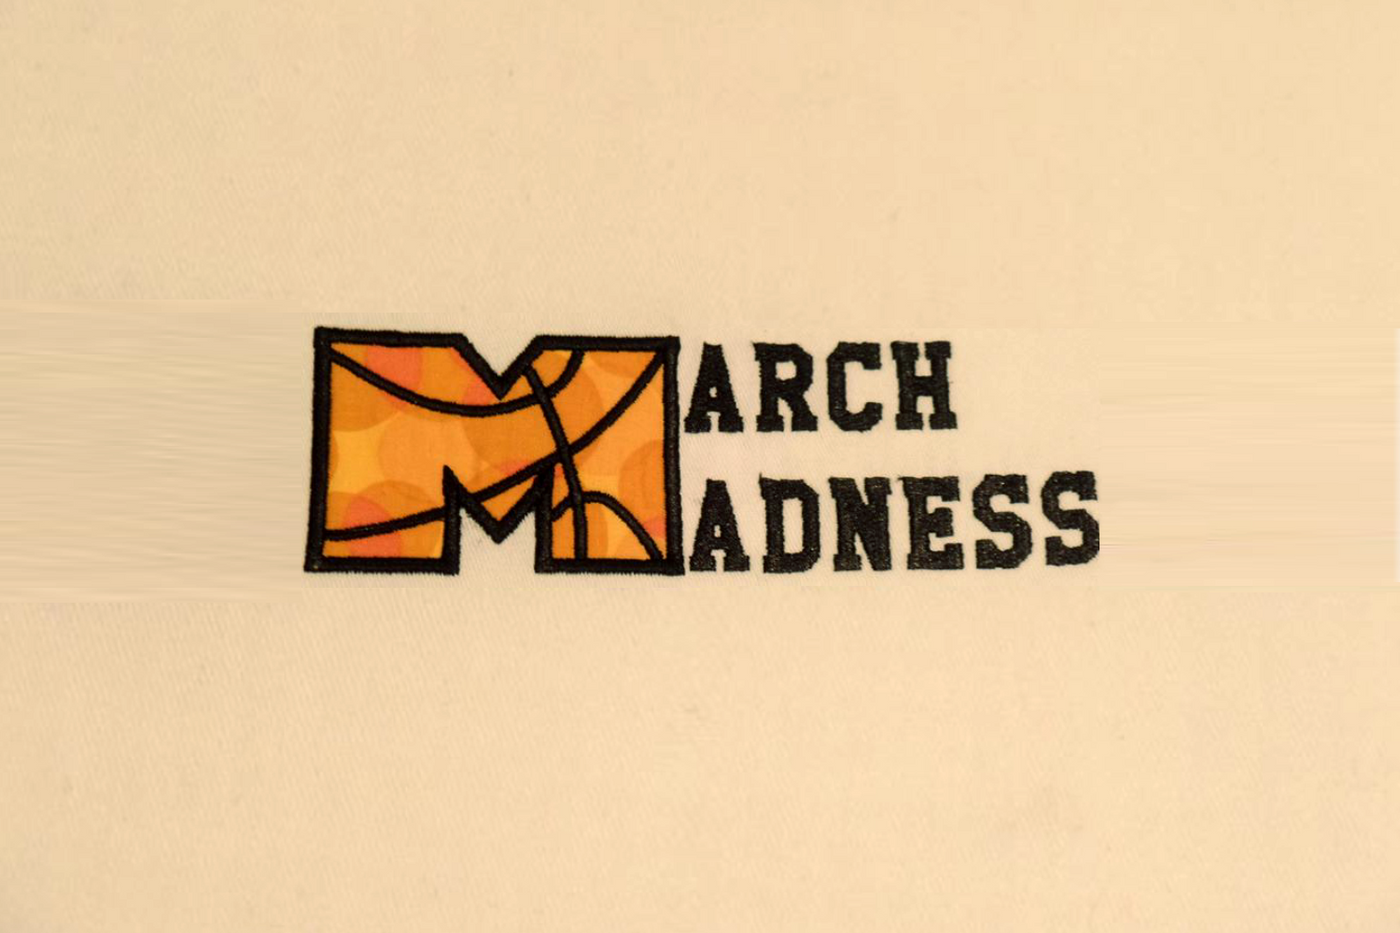 March Madness applique with basketball lines on the M